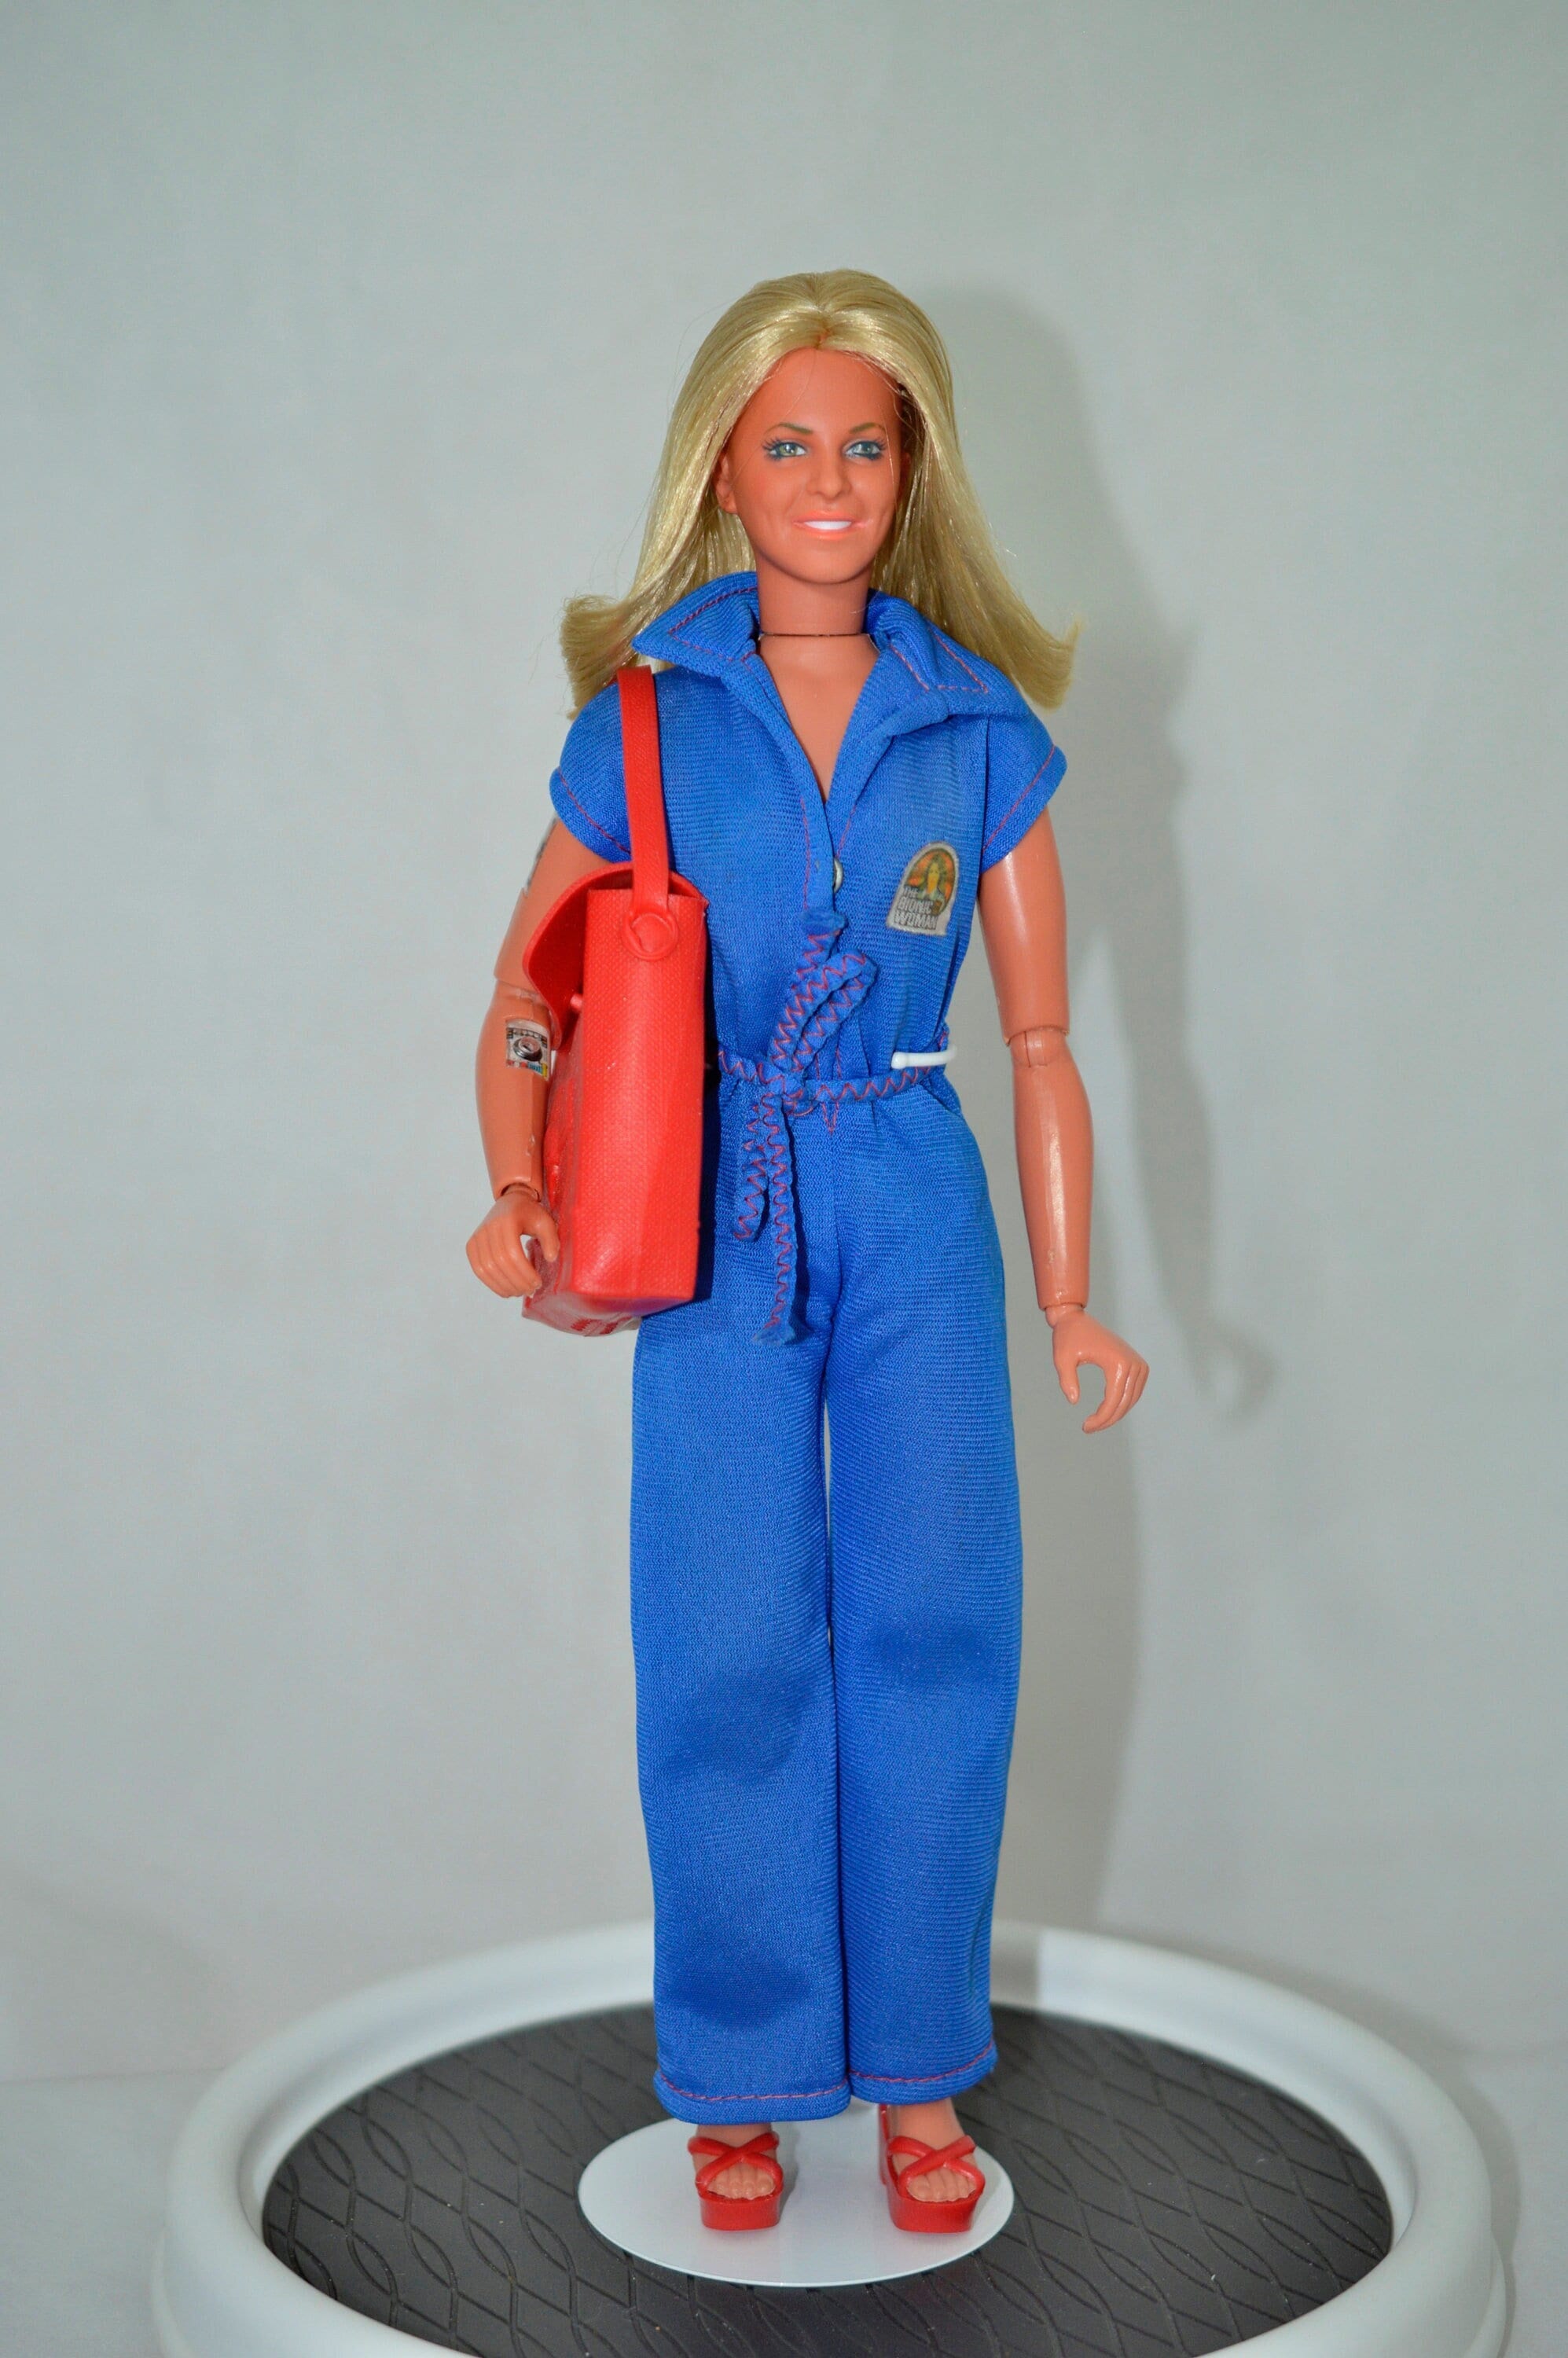 Bionic Woman Jaime Sommers Original Outfit, Purse & Accessories